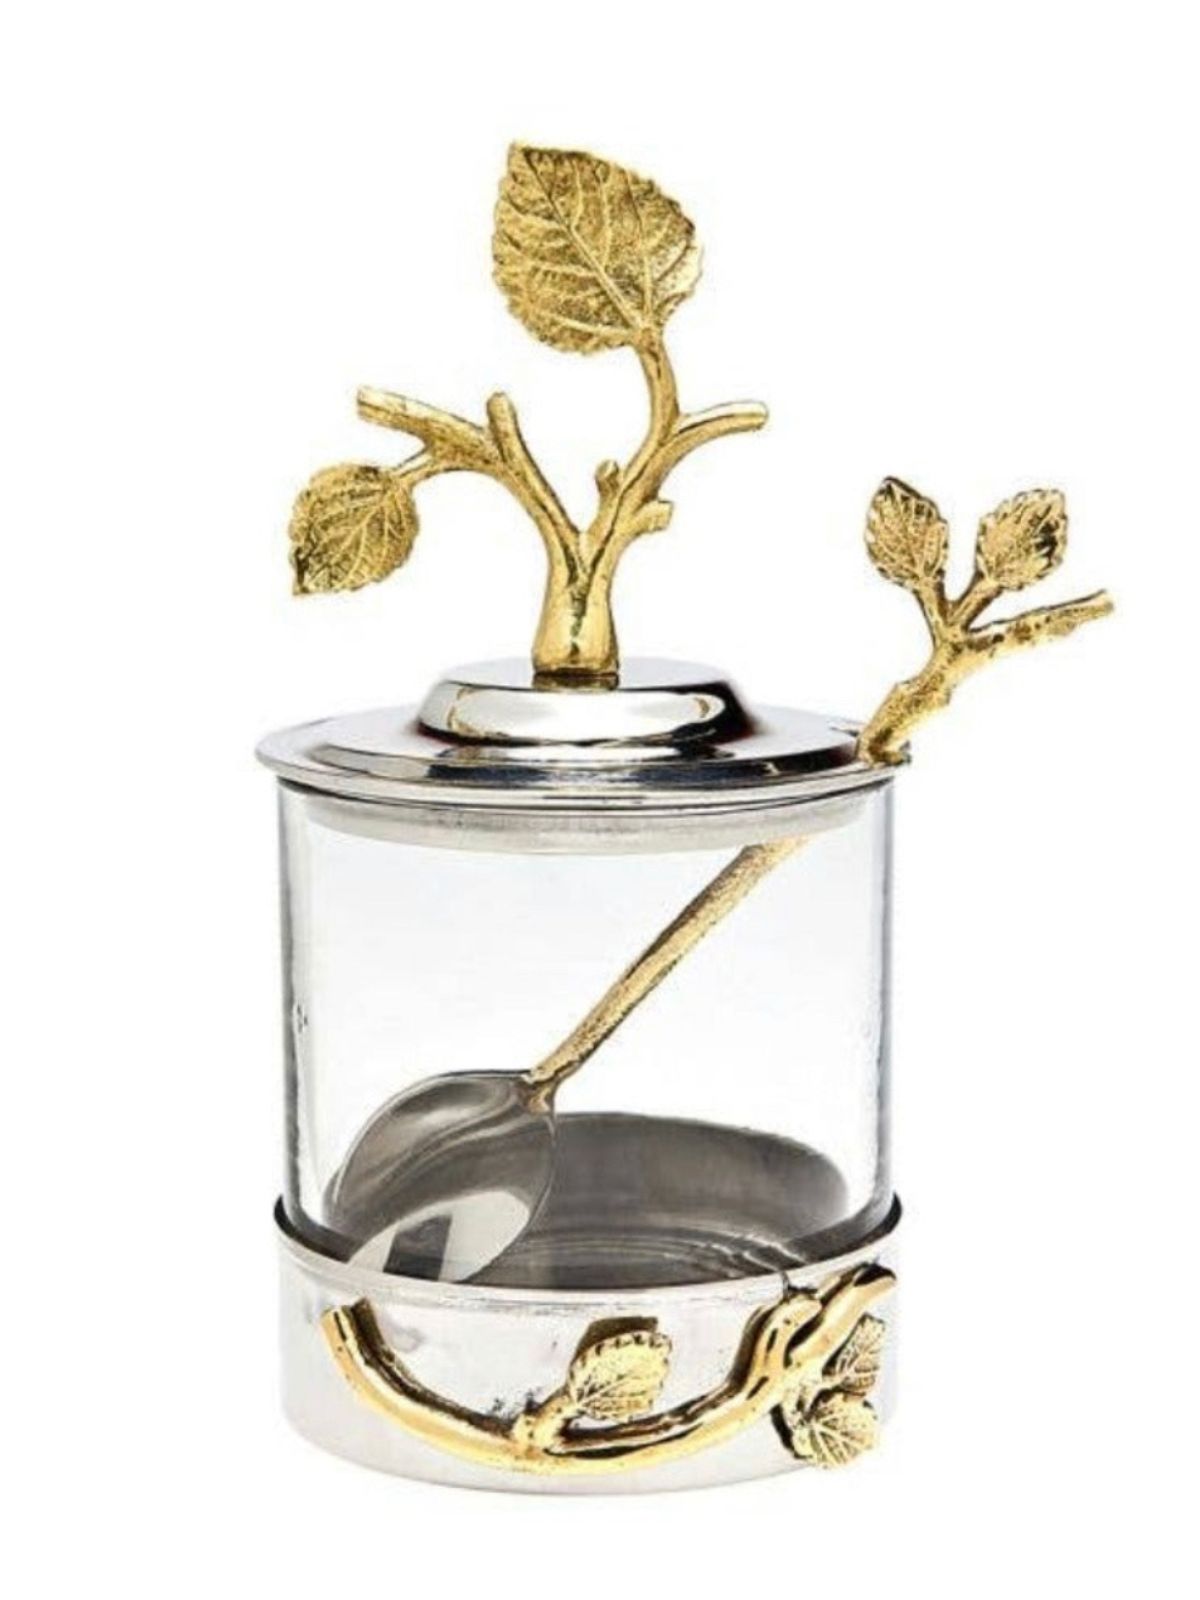 Gold Leaf Jam Jar with Stainless Steel Spoon sold by KYA Home Decor.